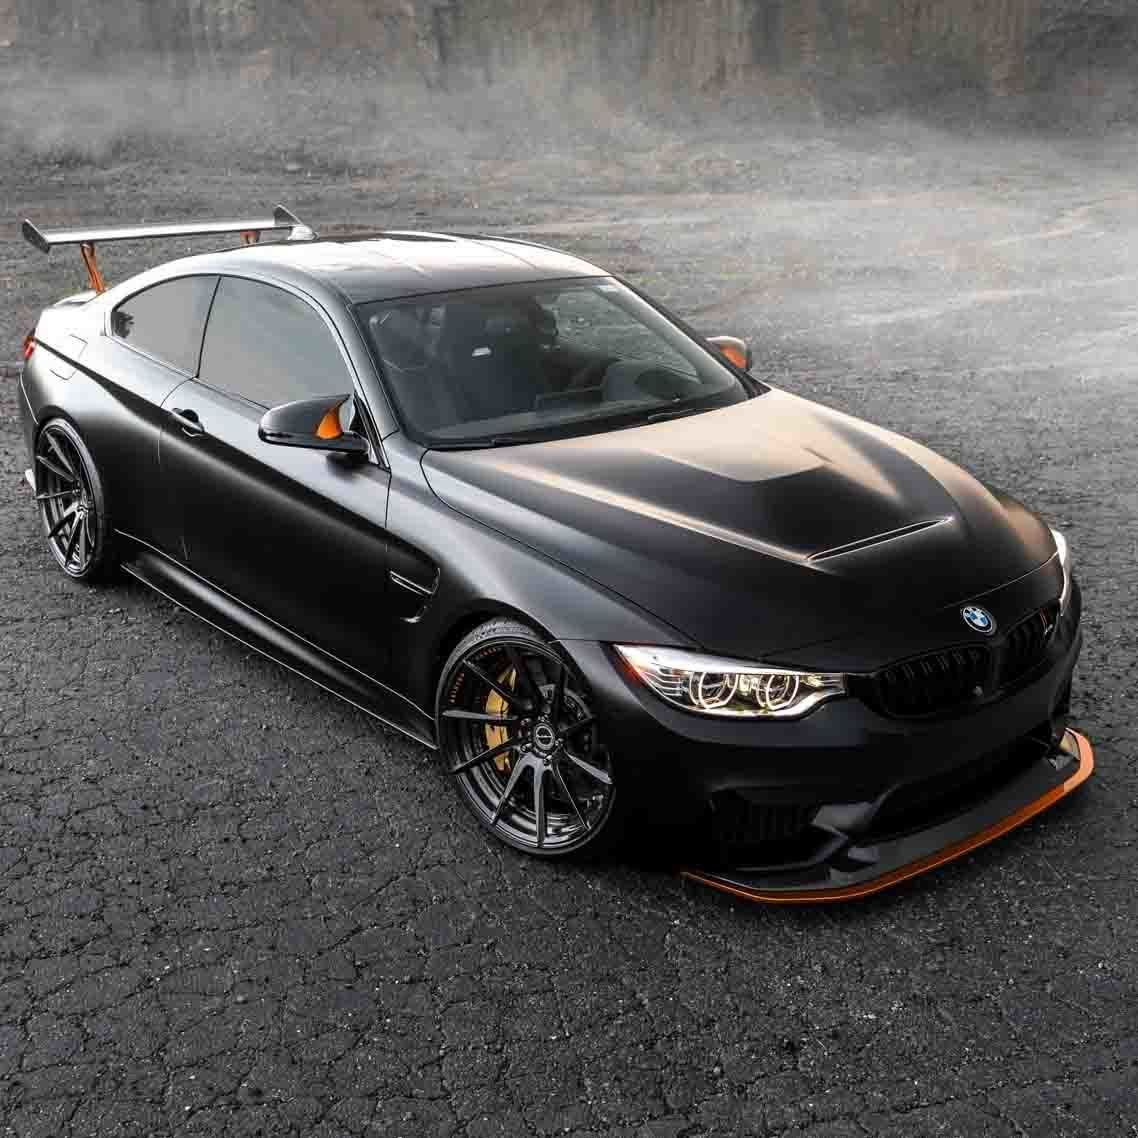 images-products-1-2780-232975068-matte-black-bmw-m4-gts-brixton-forged-r10d-duo-series-wheels-smoke-black-9.jpg